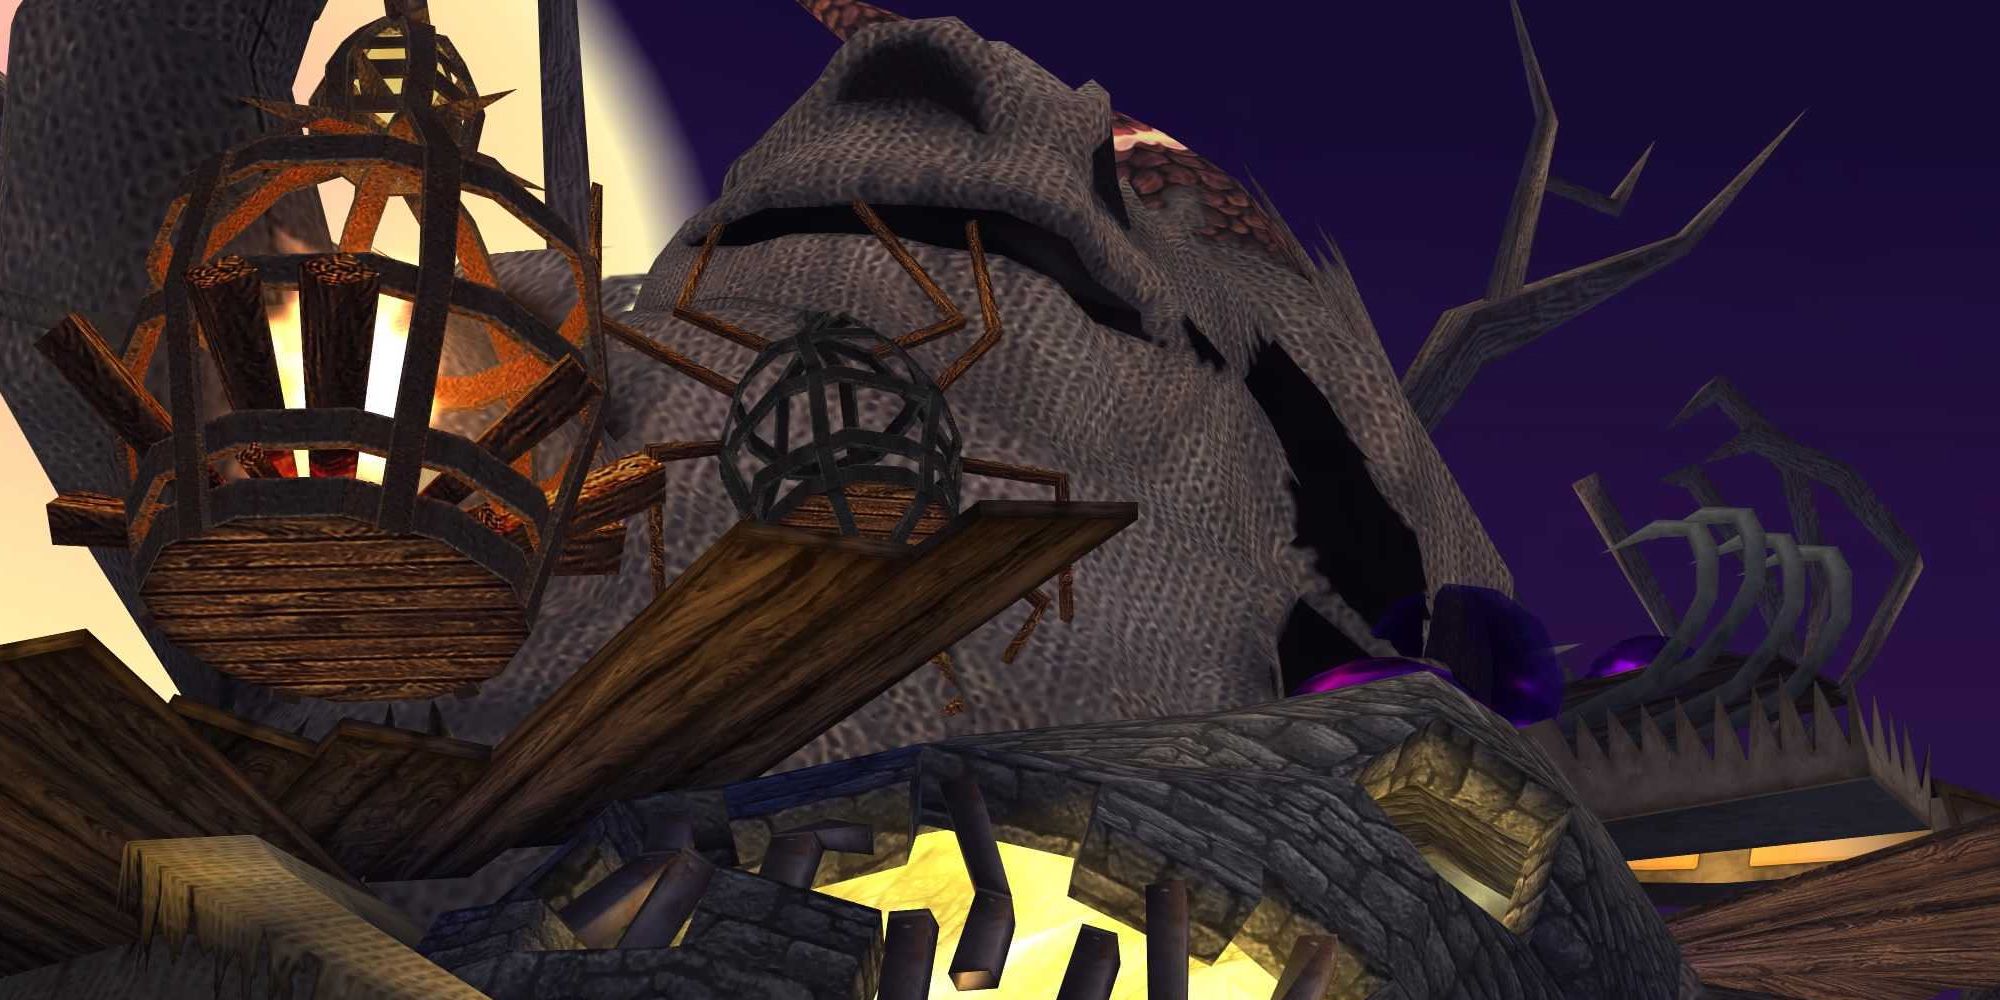 Kingdom Hearts - Nightmare before Christmas giant Oogie Boogie  with planks and stone buildings coming out